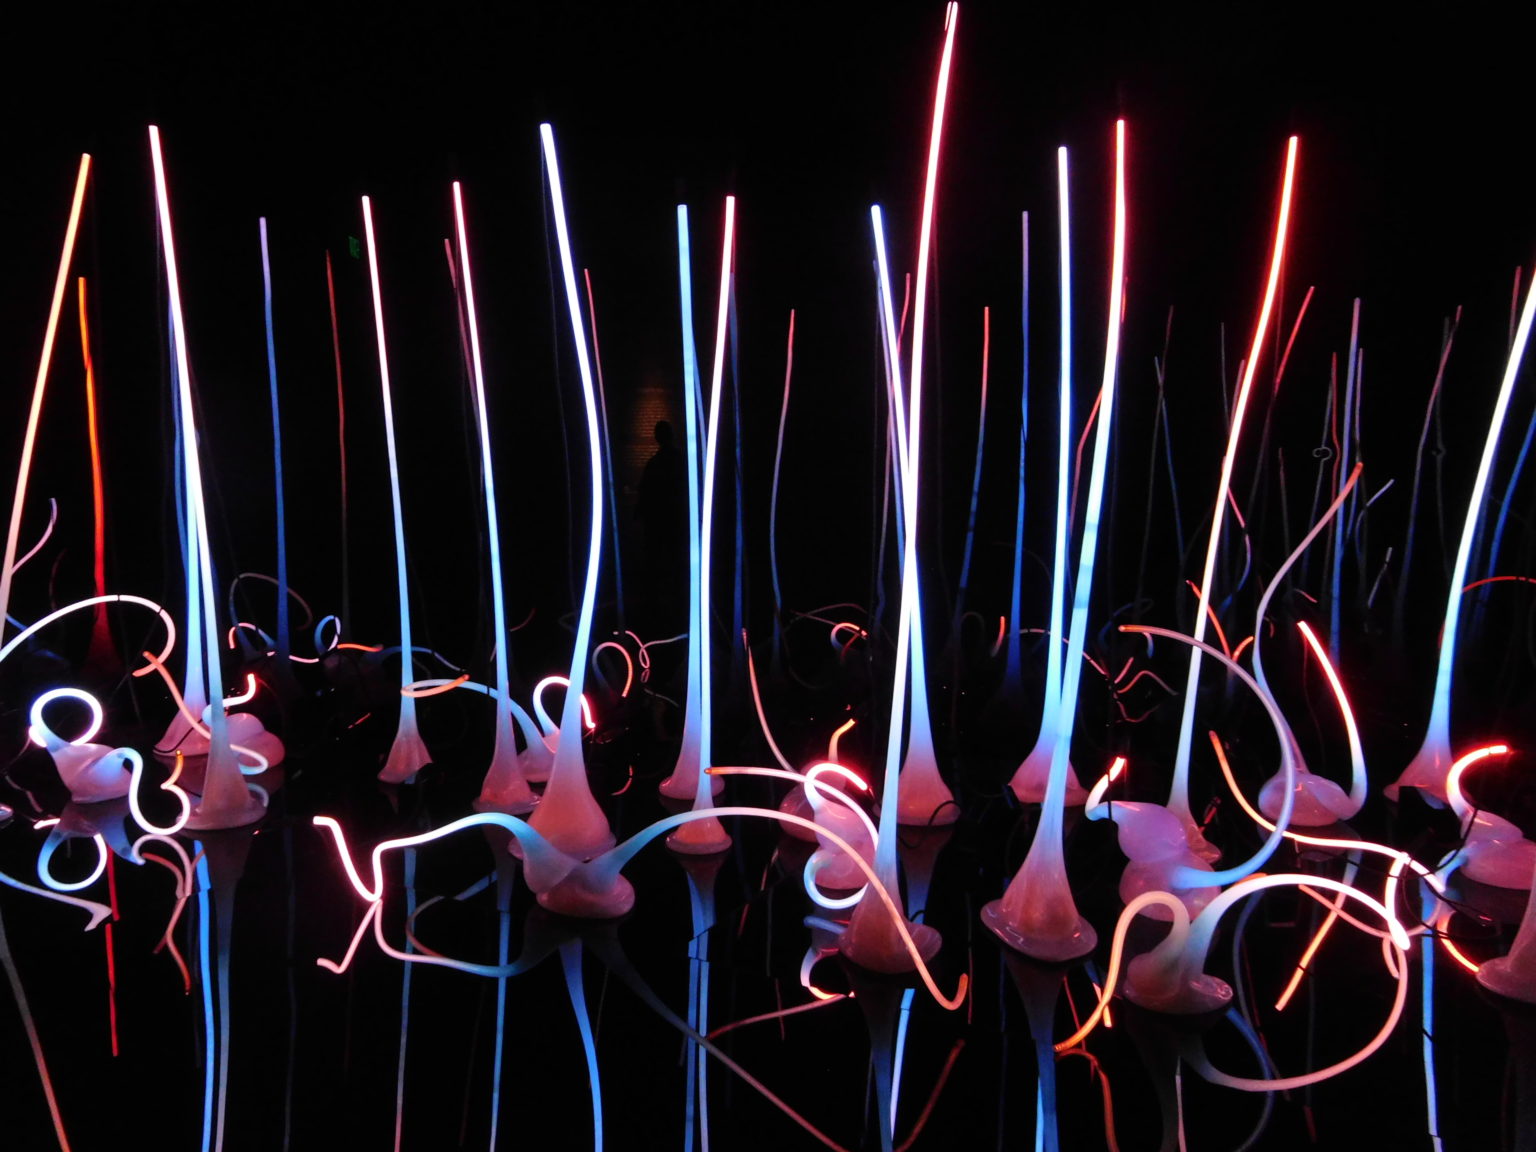 Chihuly - Amazing Glass Art You Will Never Forget